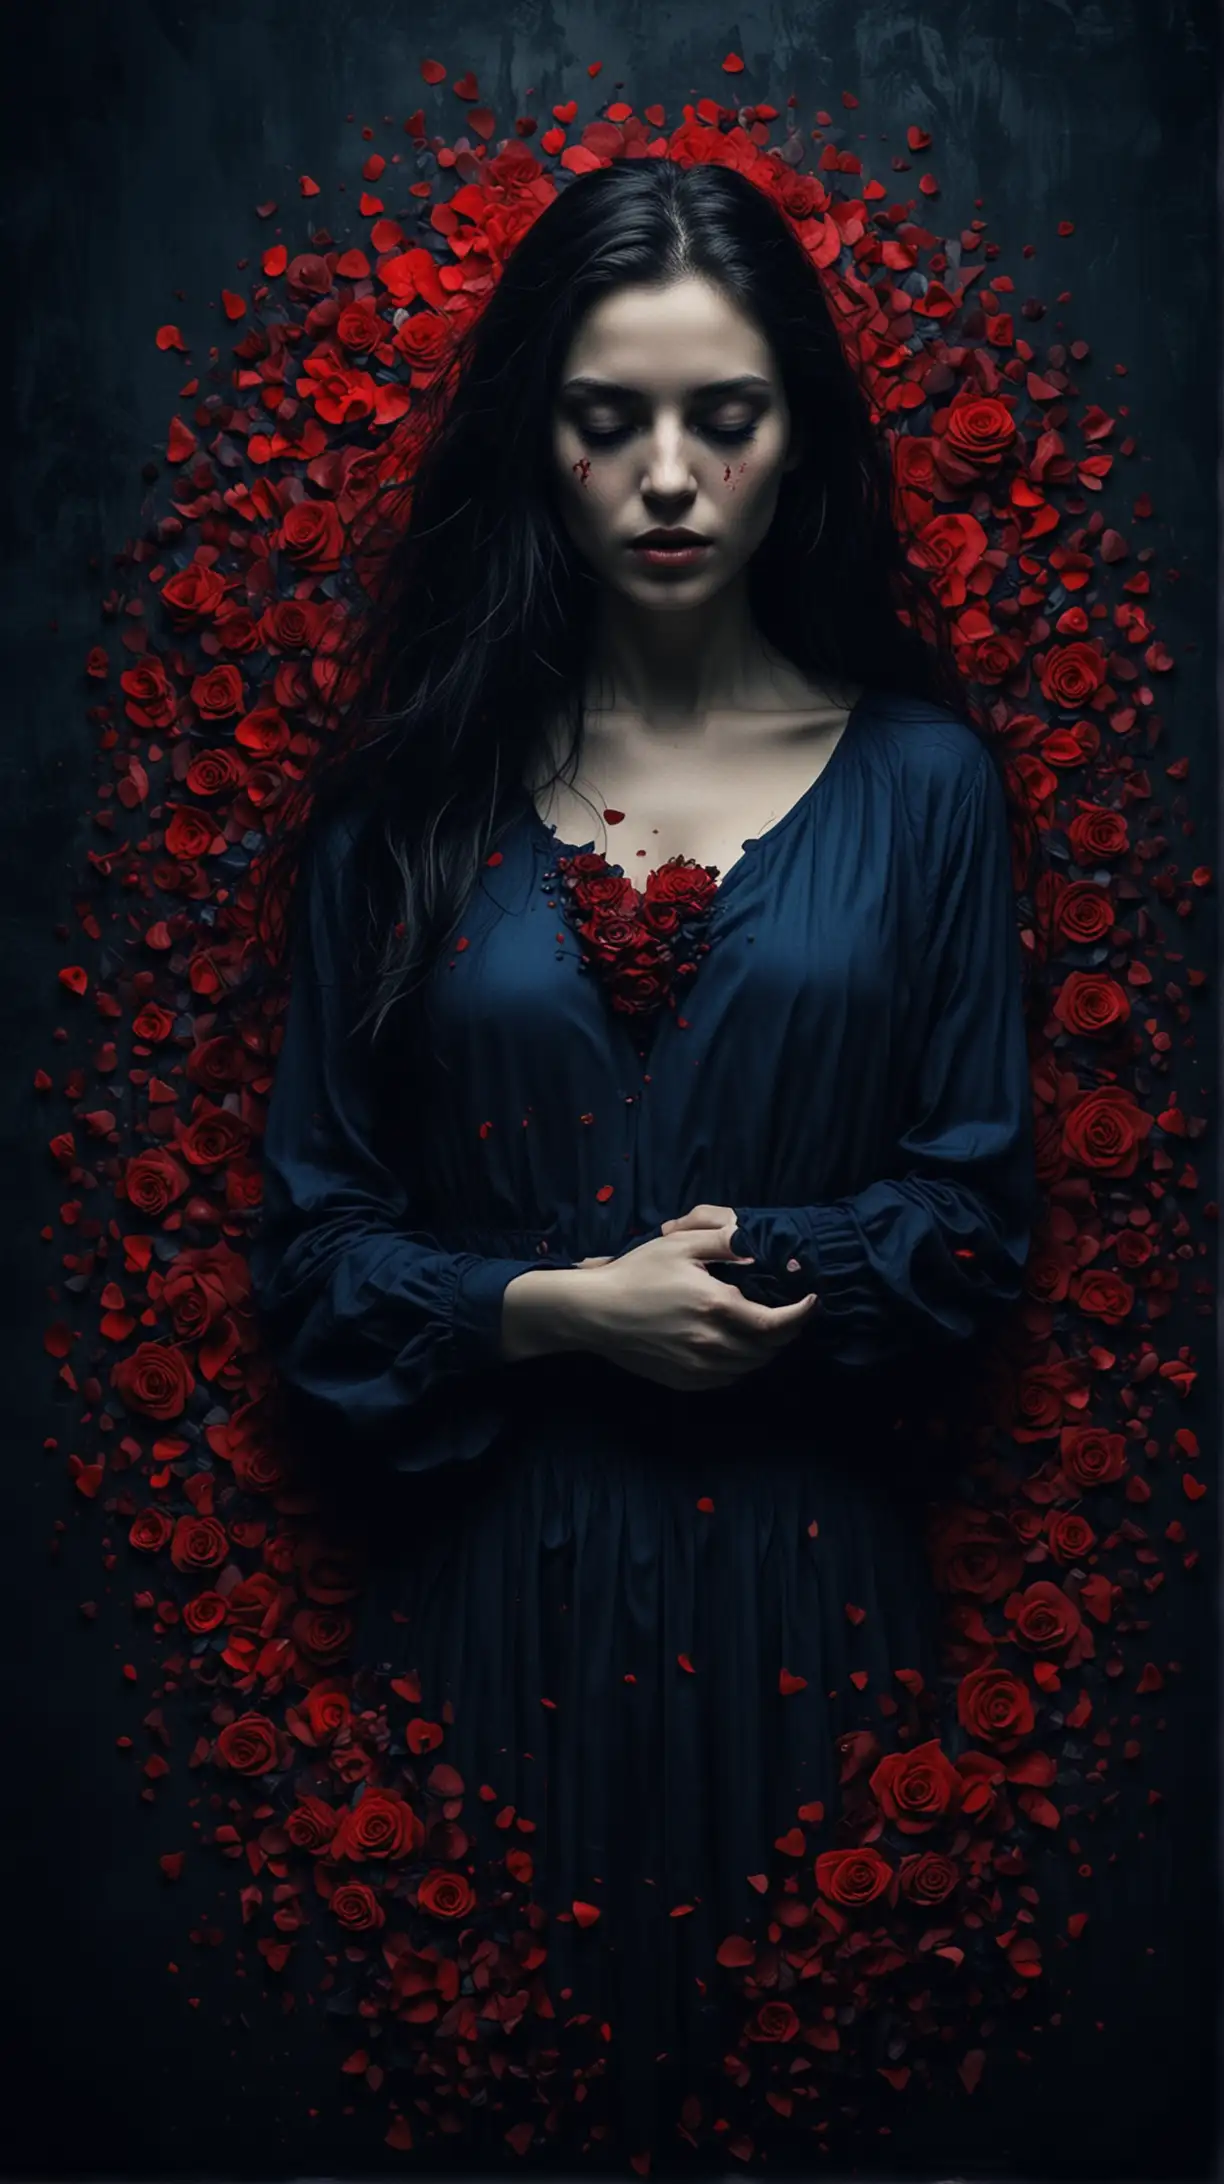 Dark Love Woman Symbolizing Psychology and Manipulation in Red and Dark Blue